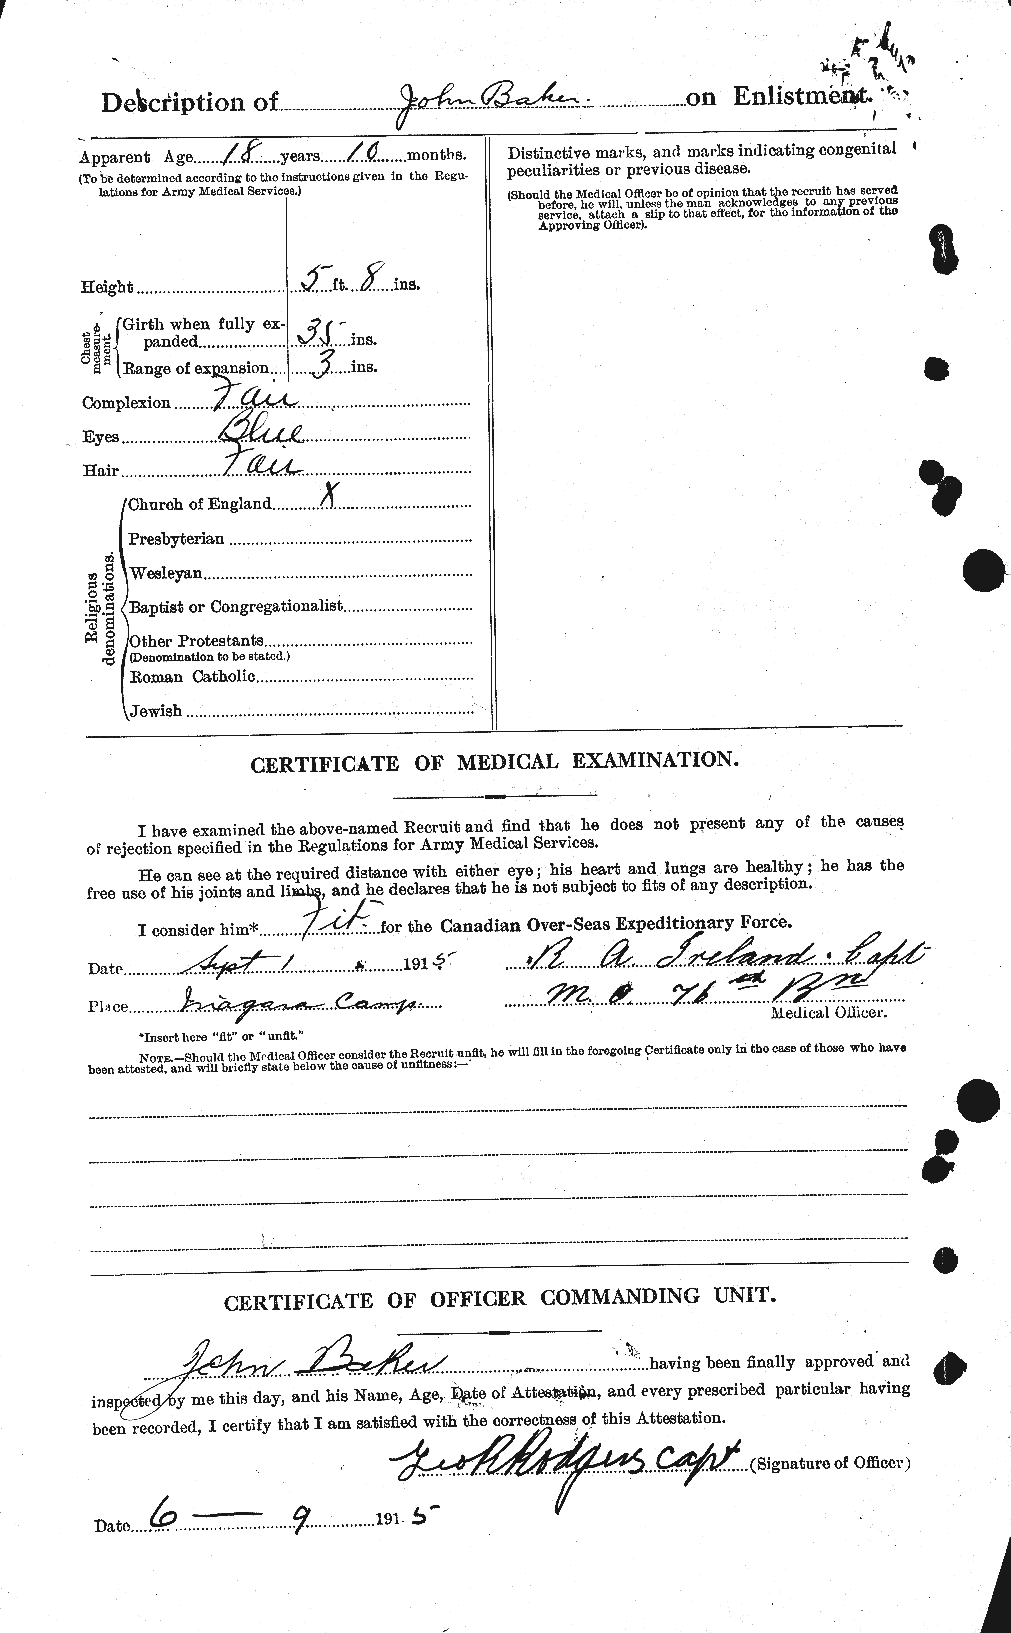 Personnel Records of the First World War - CEF 221902b